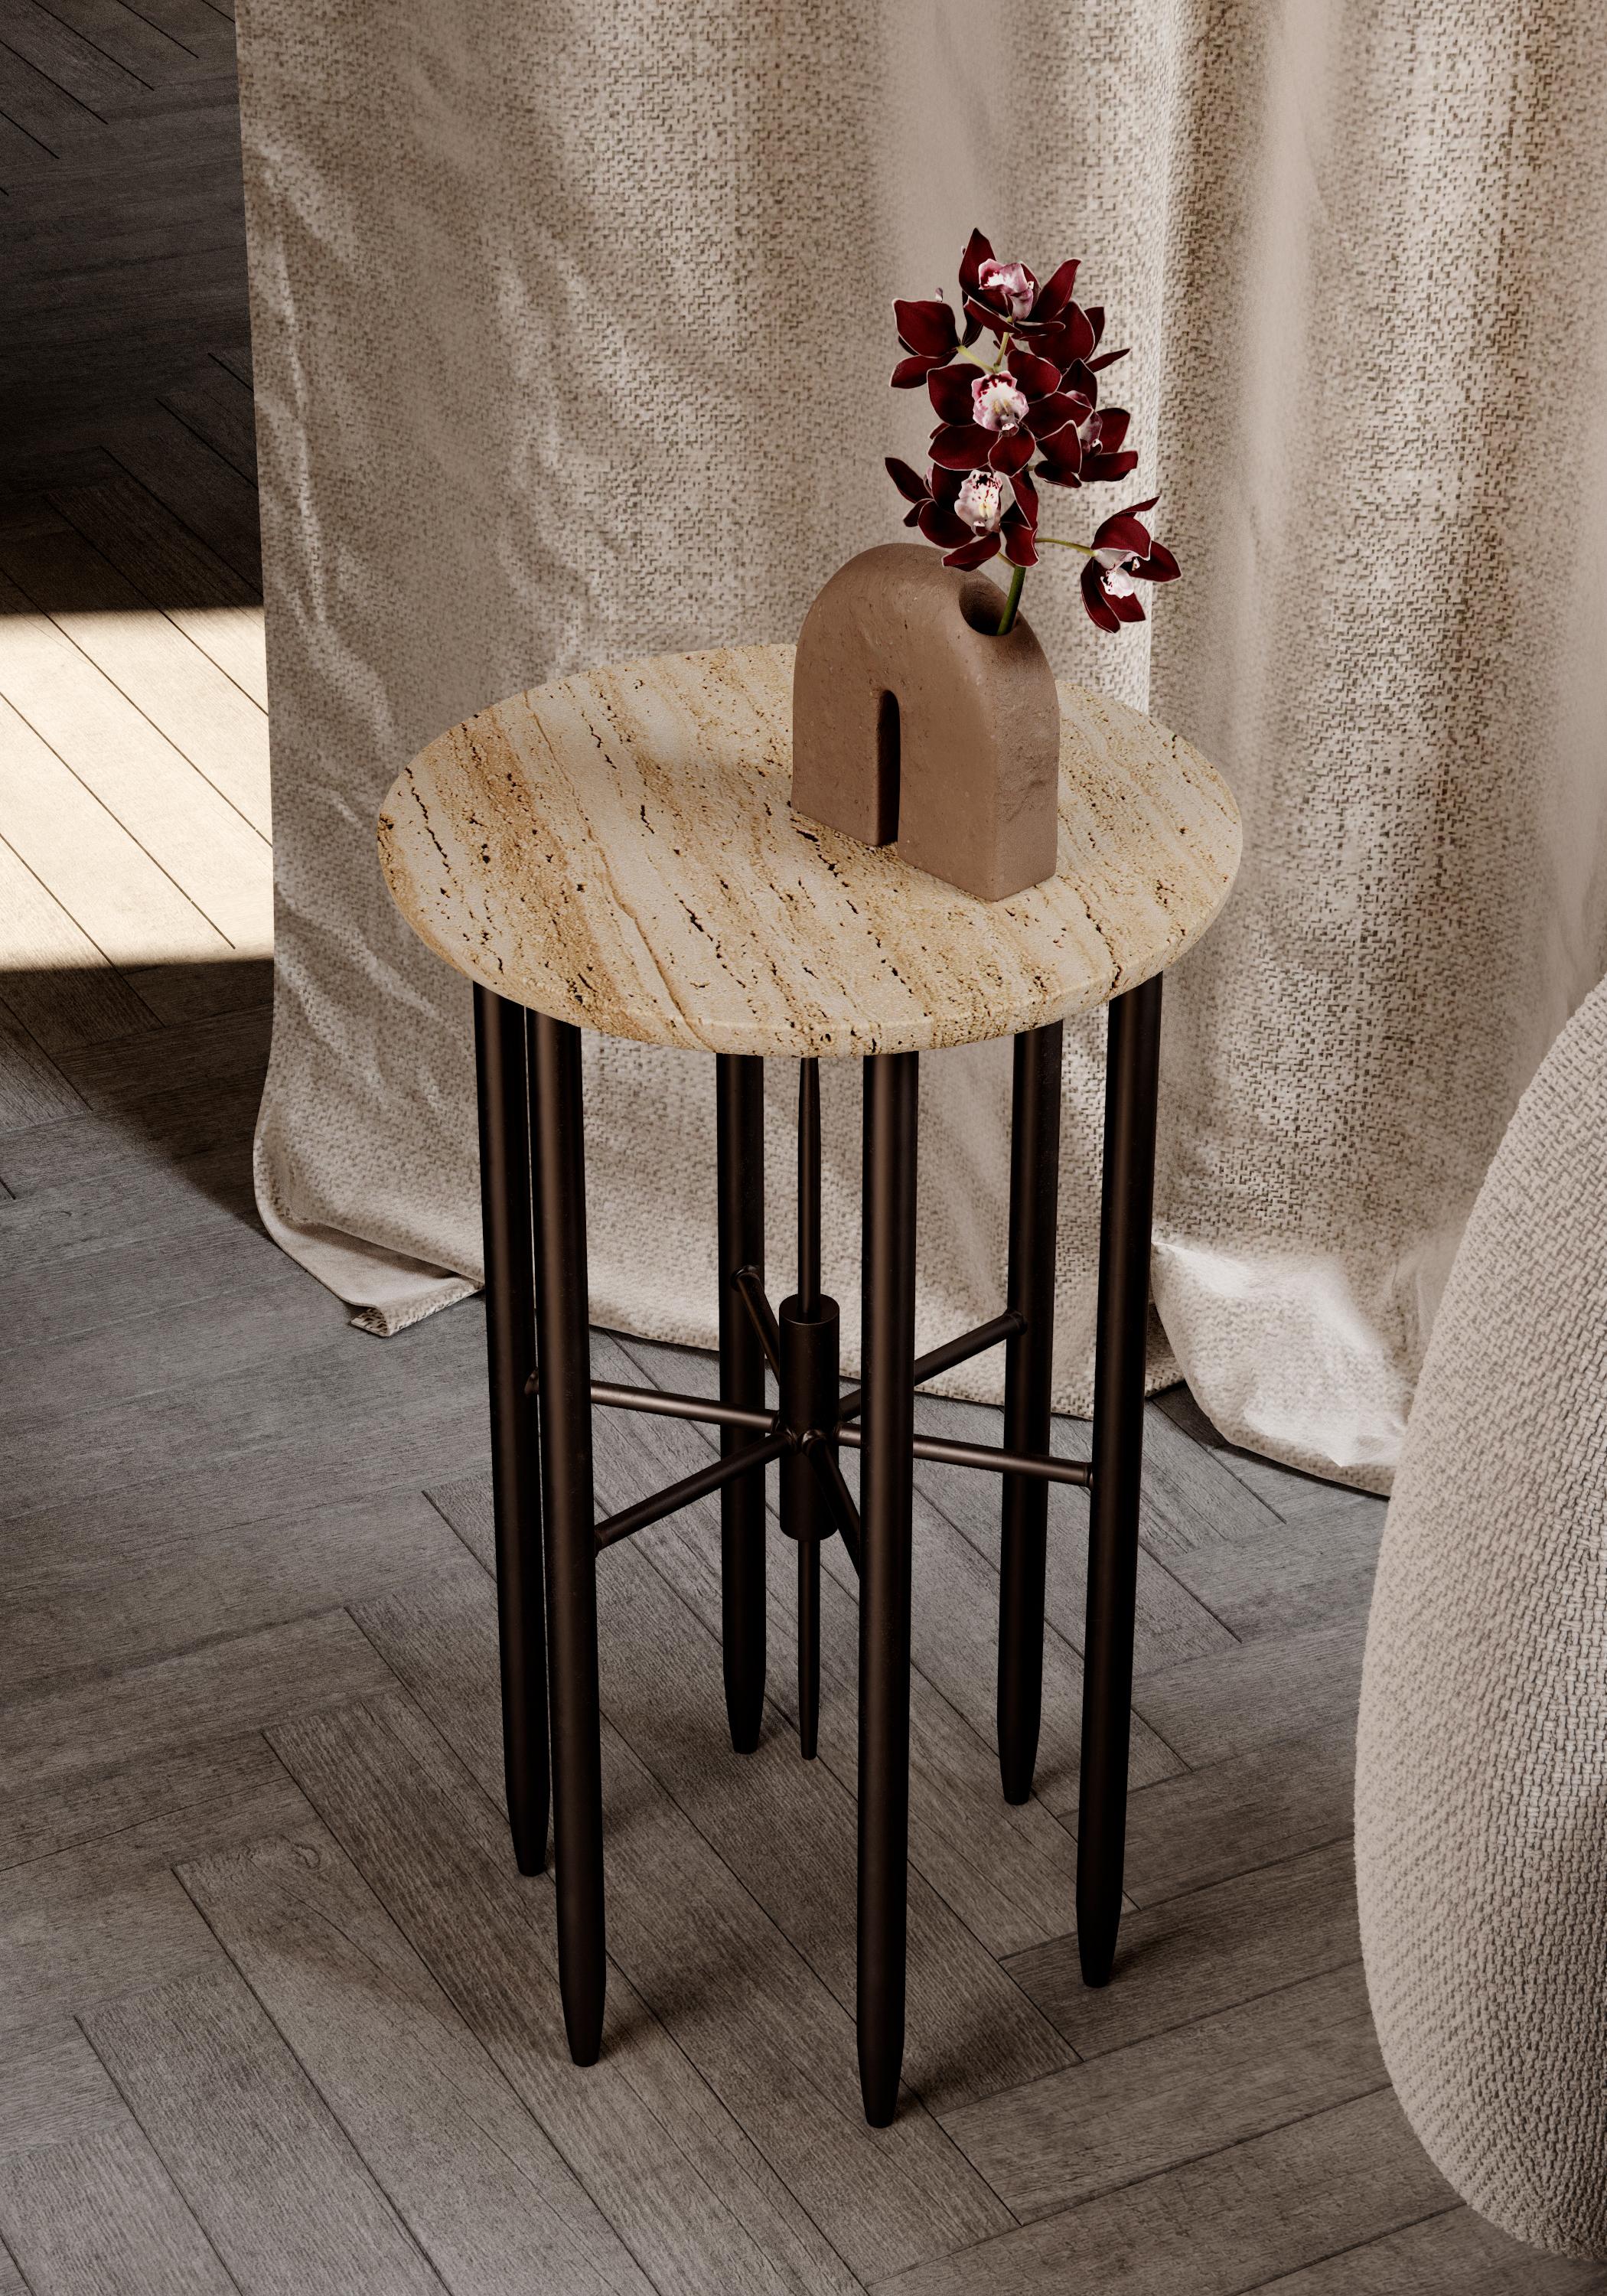 Our contemporary marble table includes the incredible diversity of the Middle Eastern culture into our Golestan series. Mirroring an architectural outline, a disc-shaped dark brown marble top sits elegantly on handcrafted iron legs bound together by